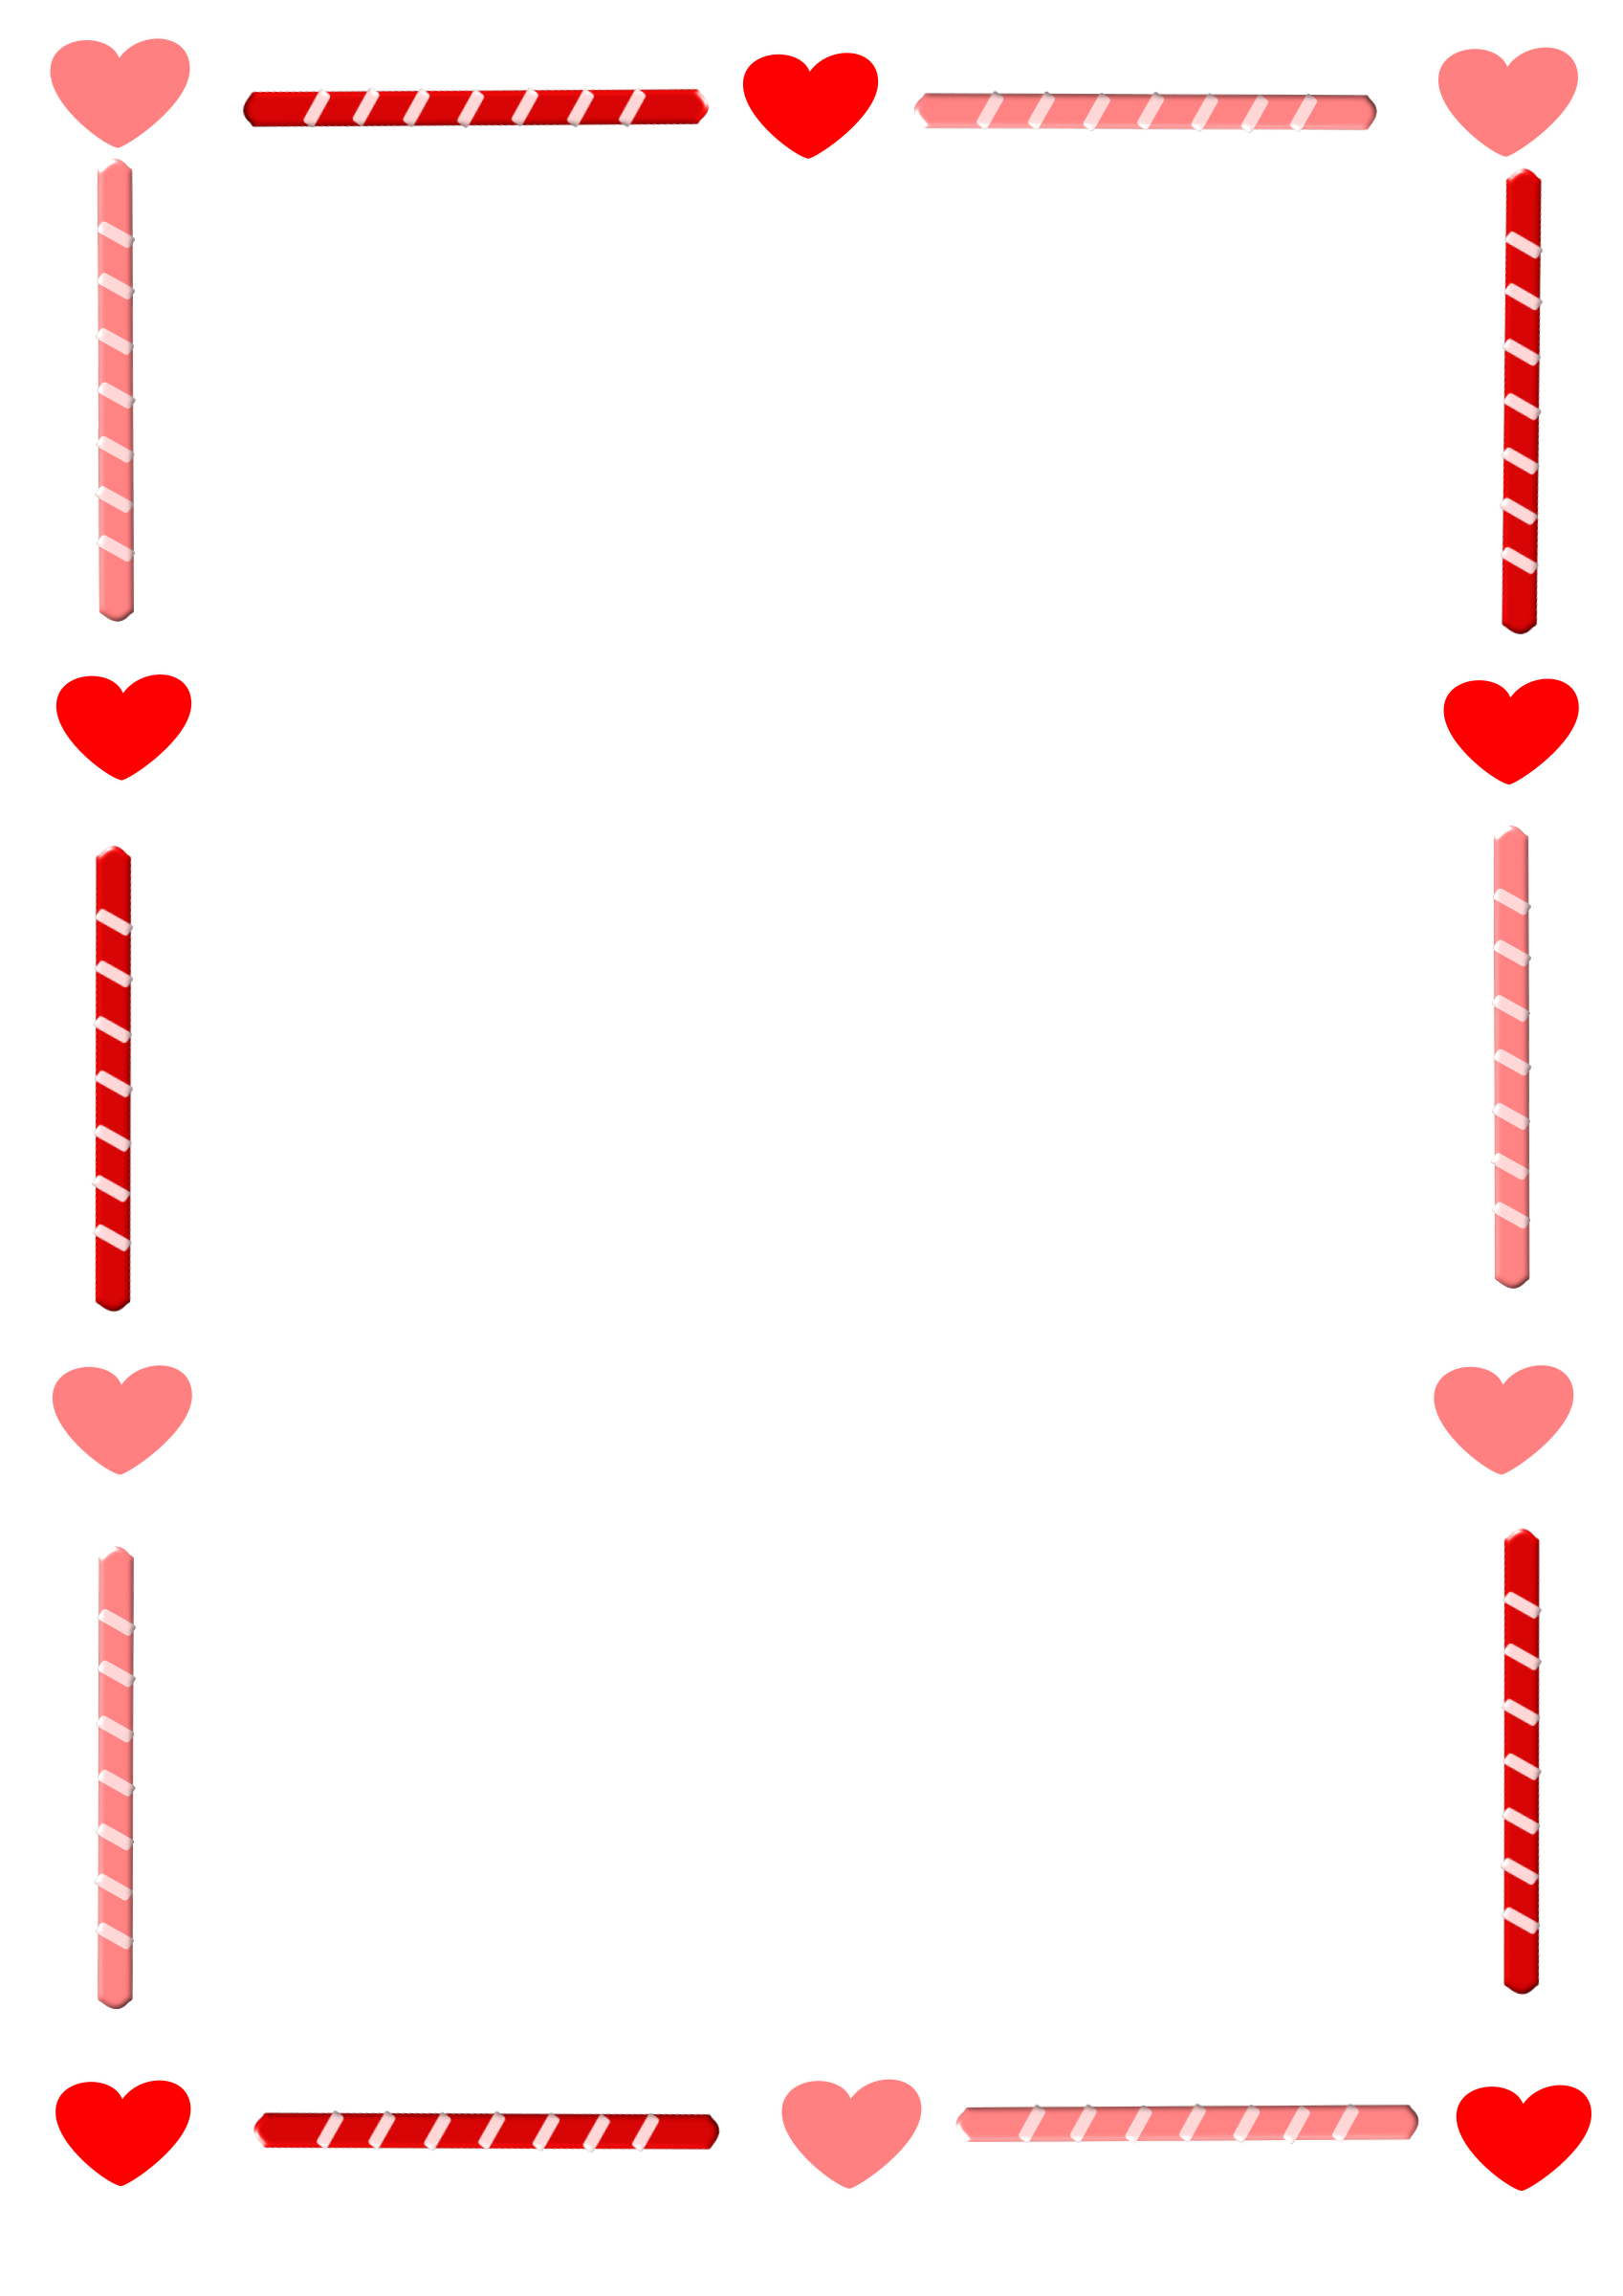 Heart border clipart heart and candy border